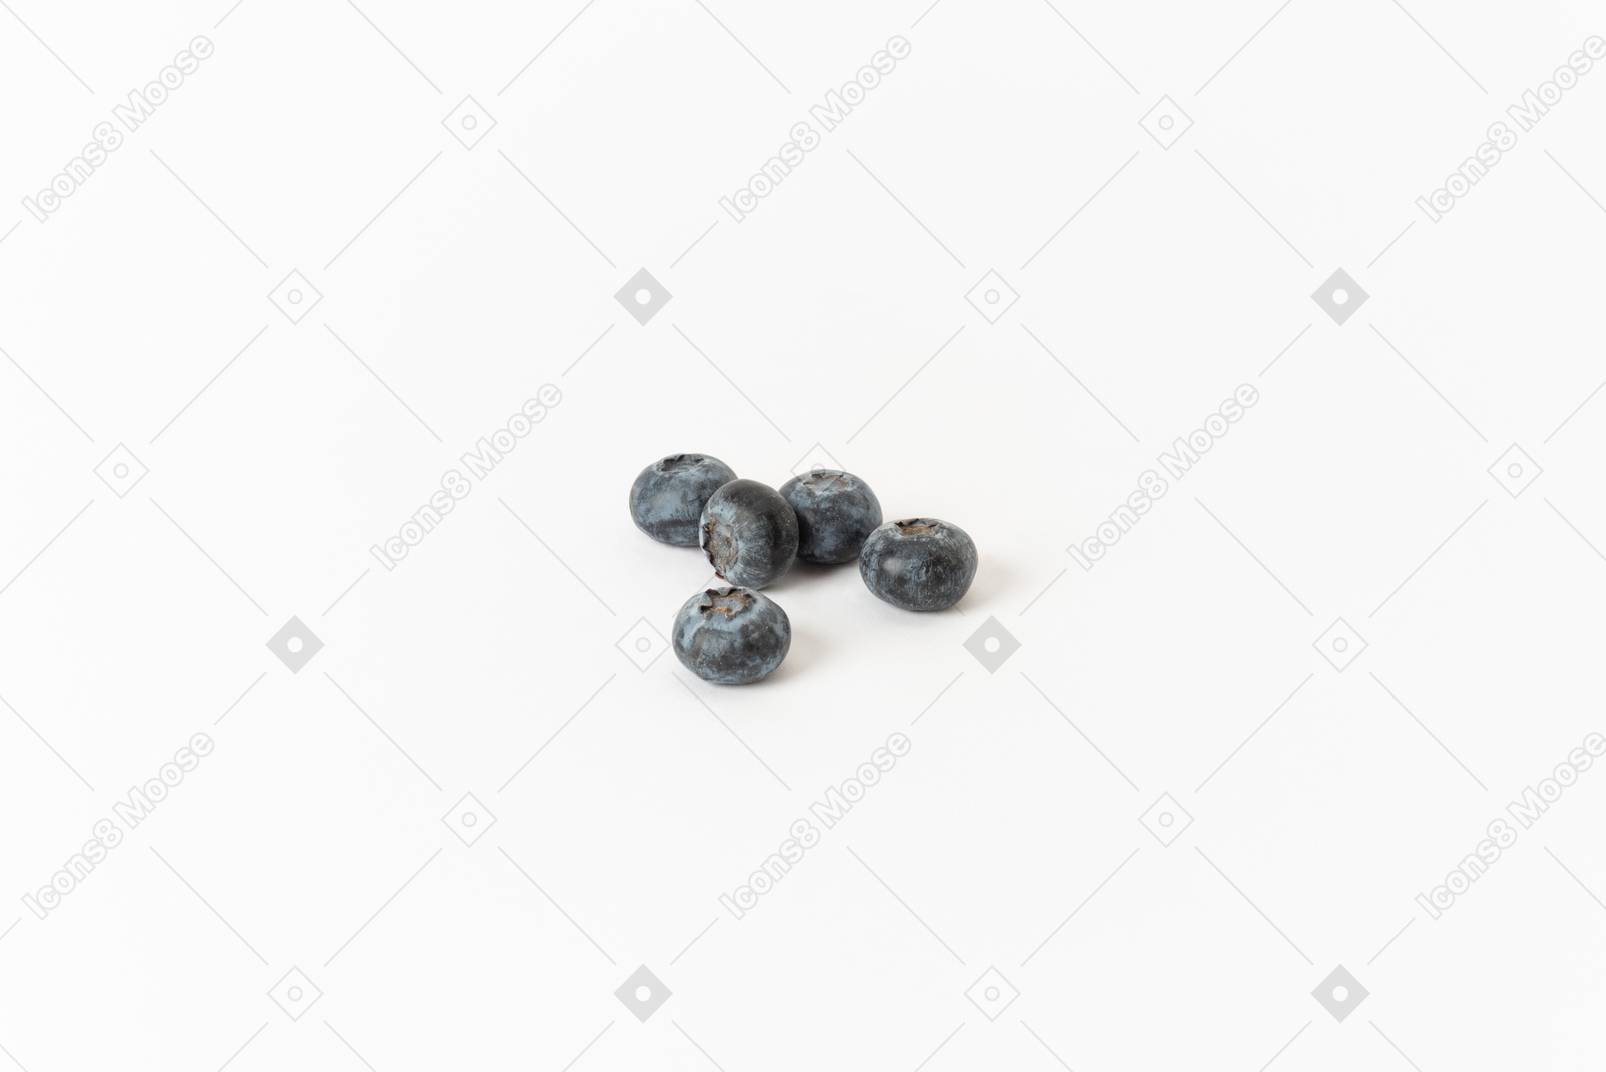 Blueberries are so juicy and yummy